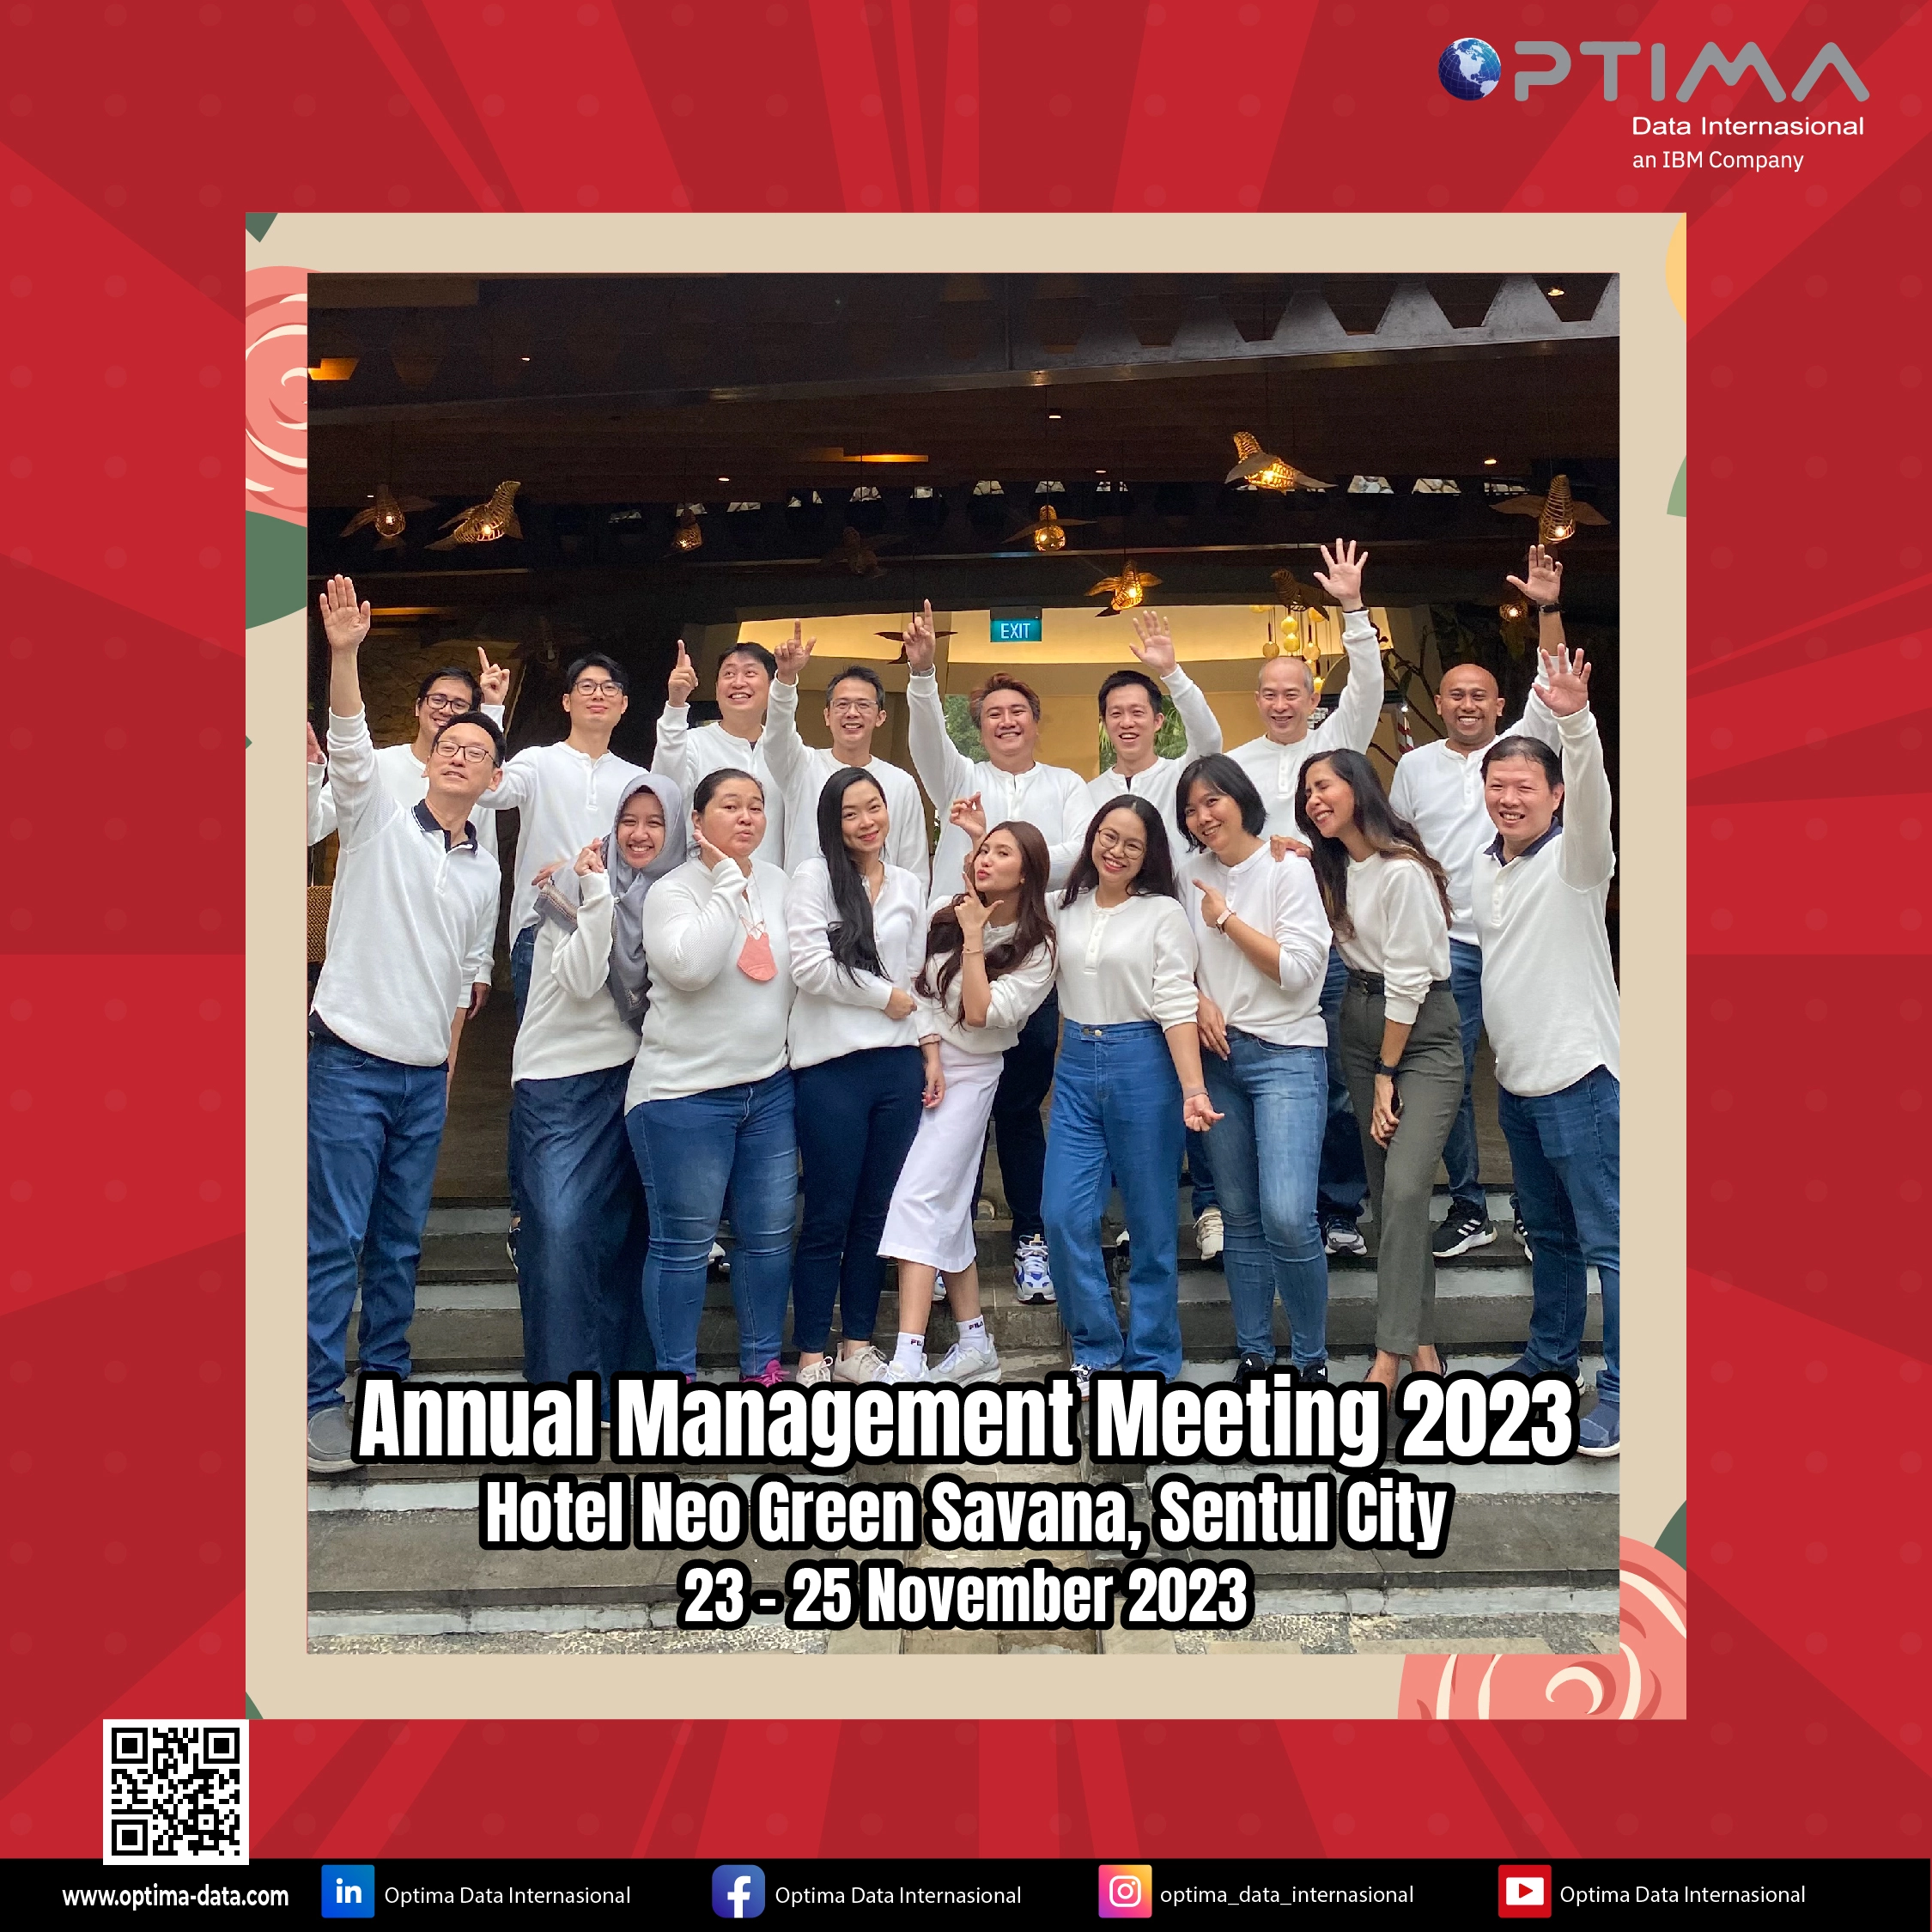 Annual Management Meeting 2023